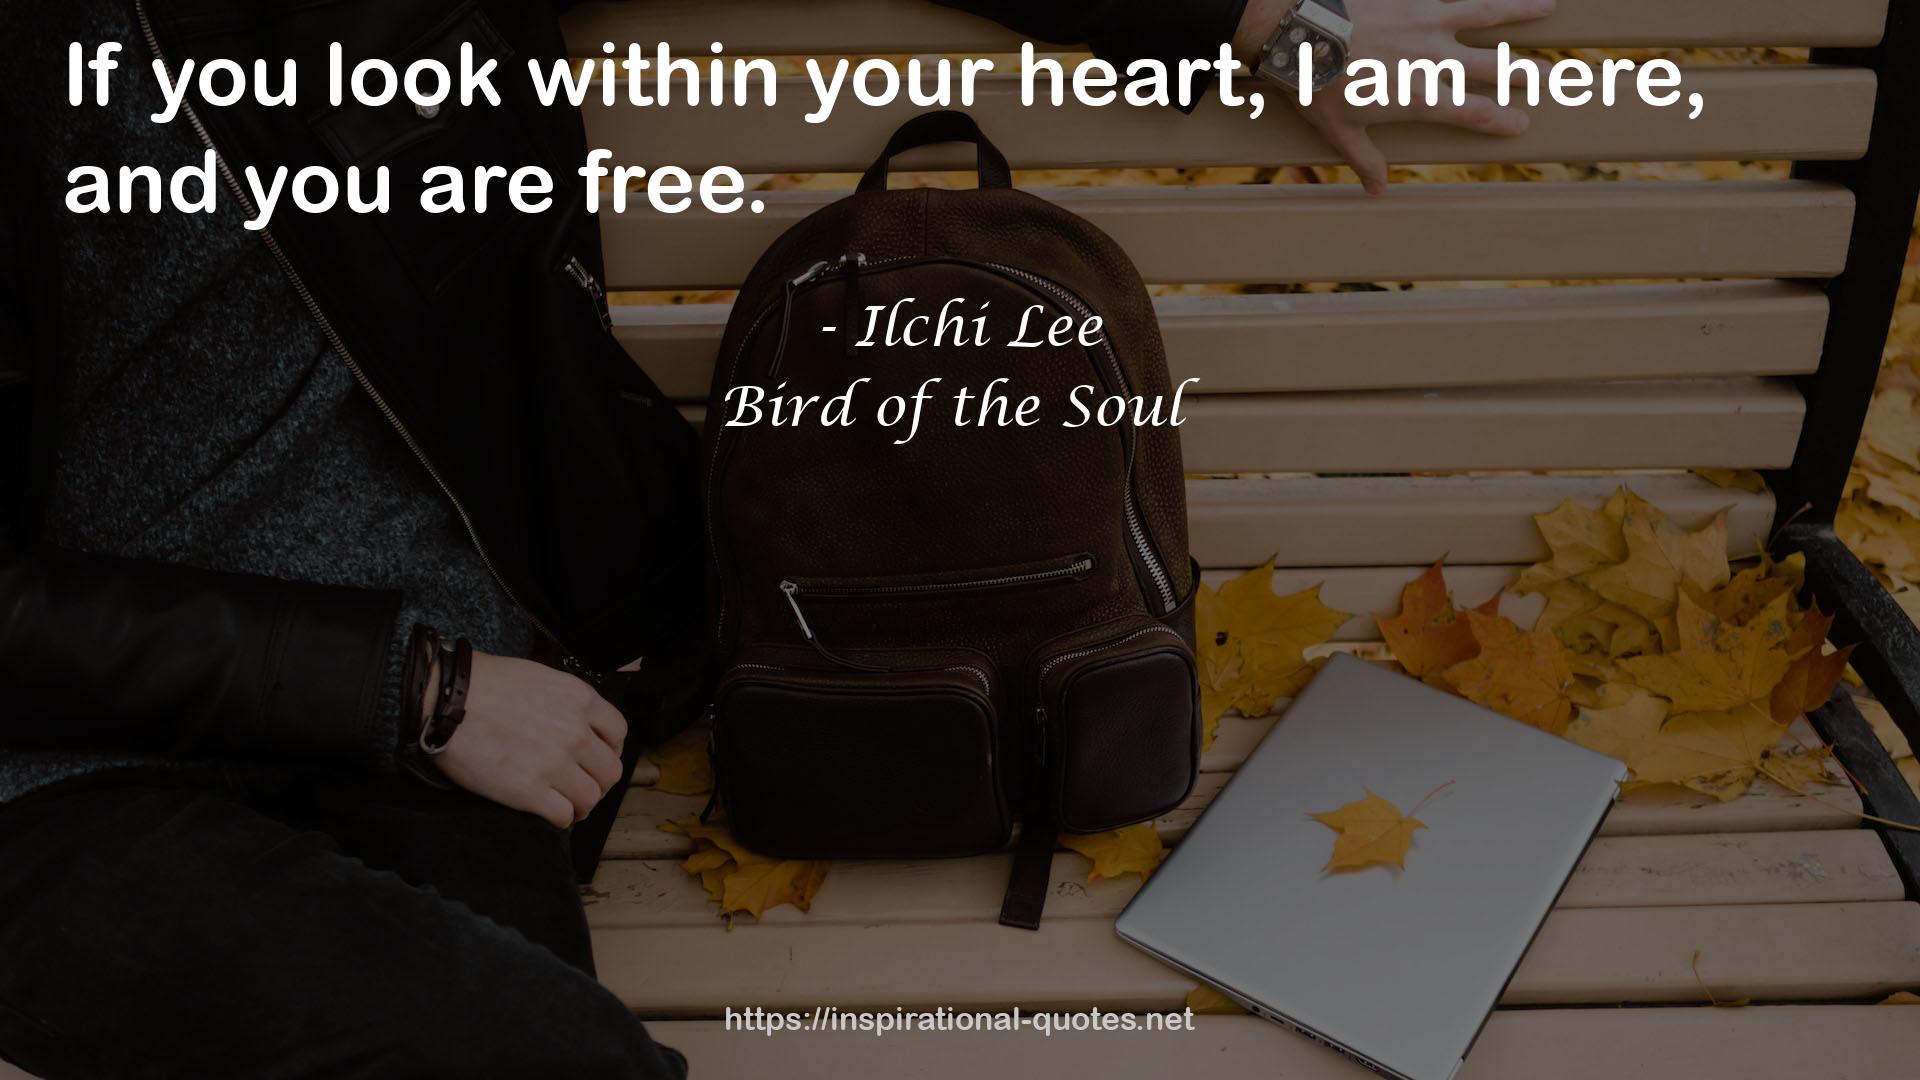 Bird of the Soul QUOTES